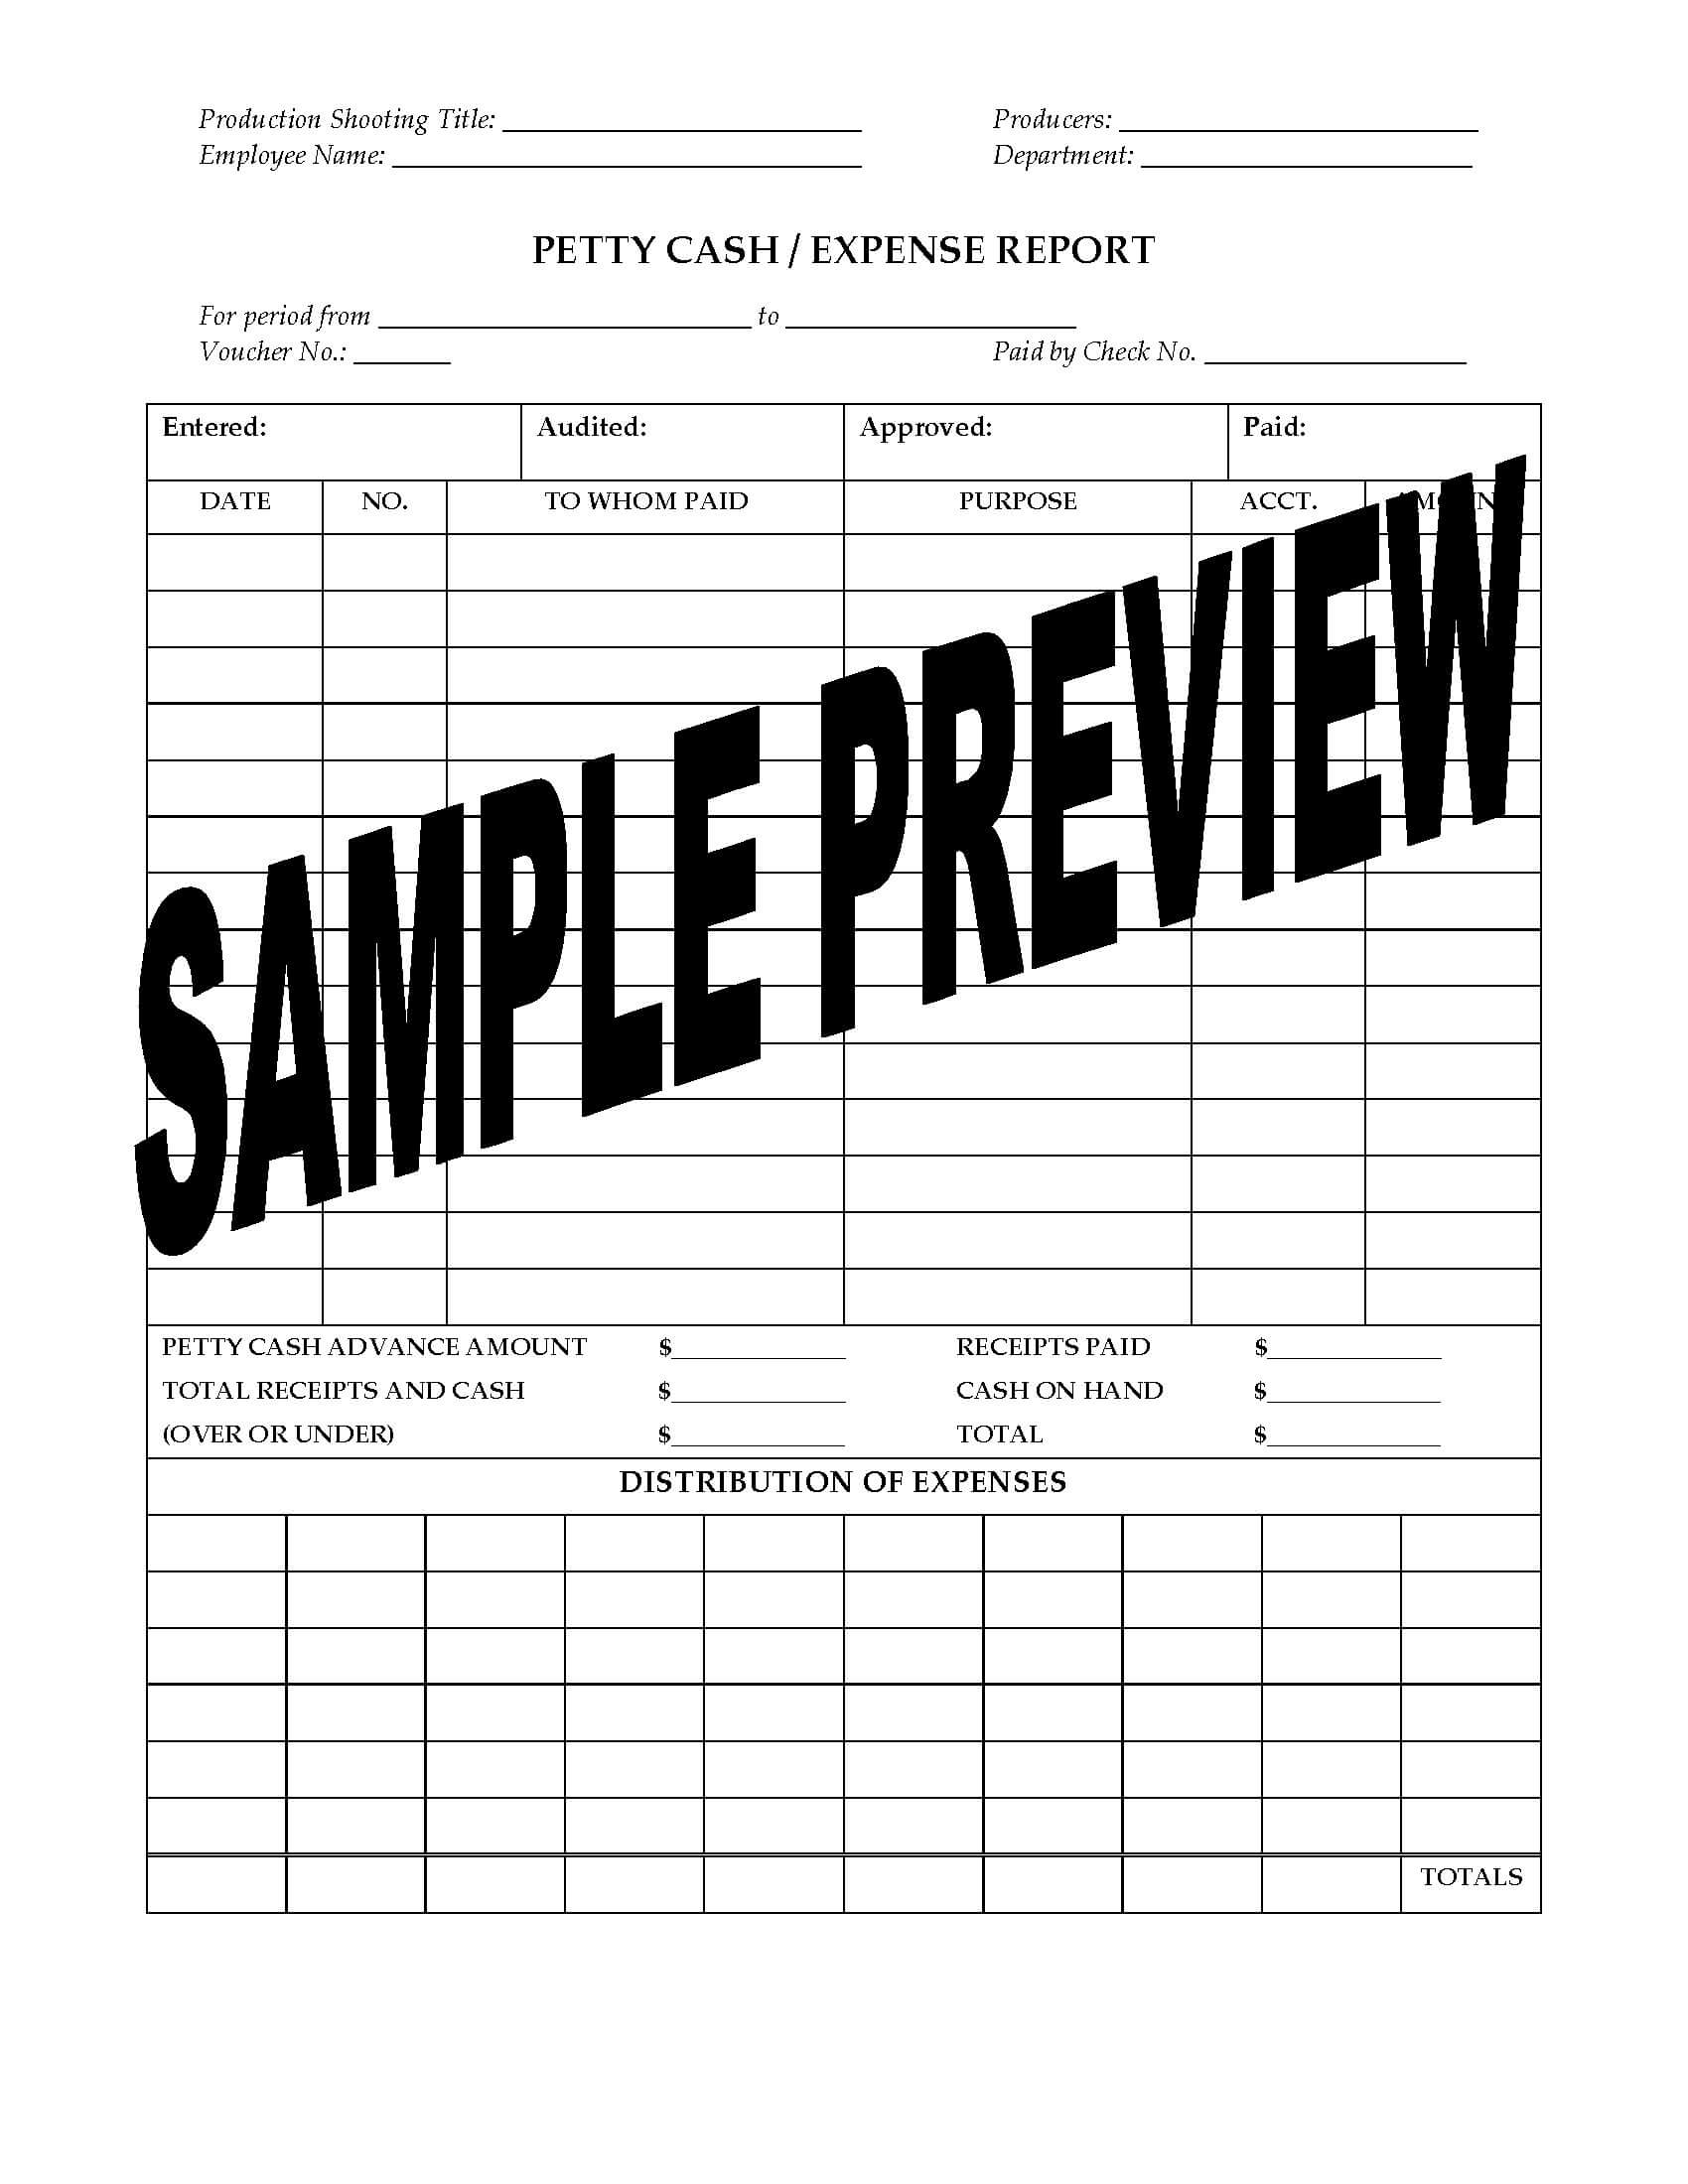 Petty Cash Expense Report For Film Or Tv Production Intended For Petty Cash Expense Report Template